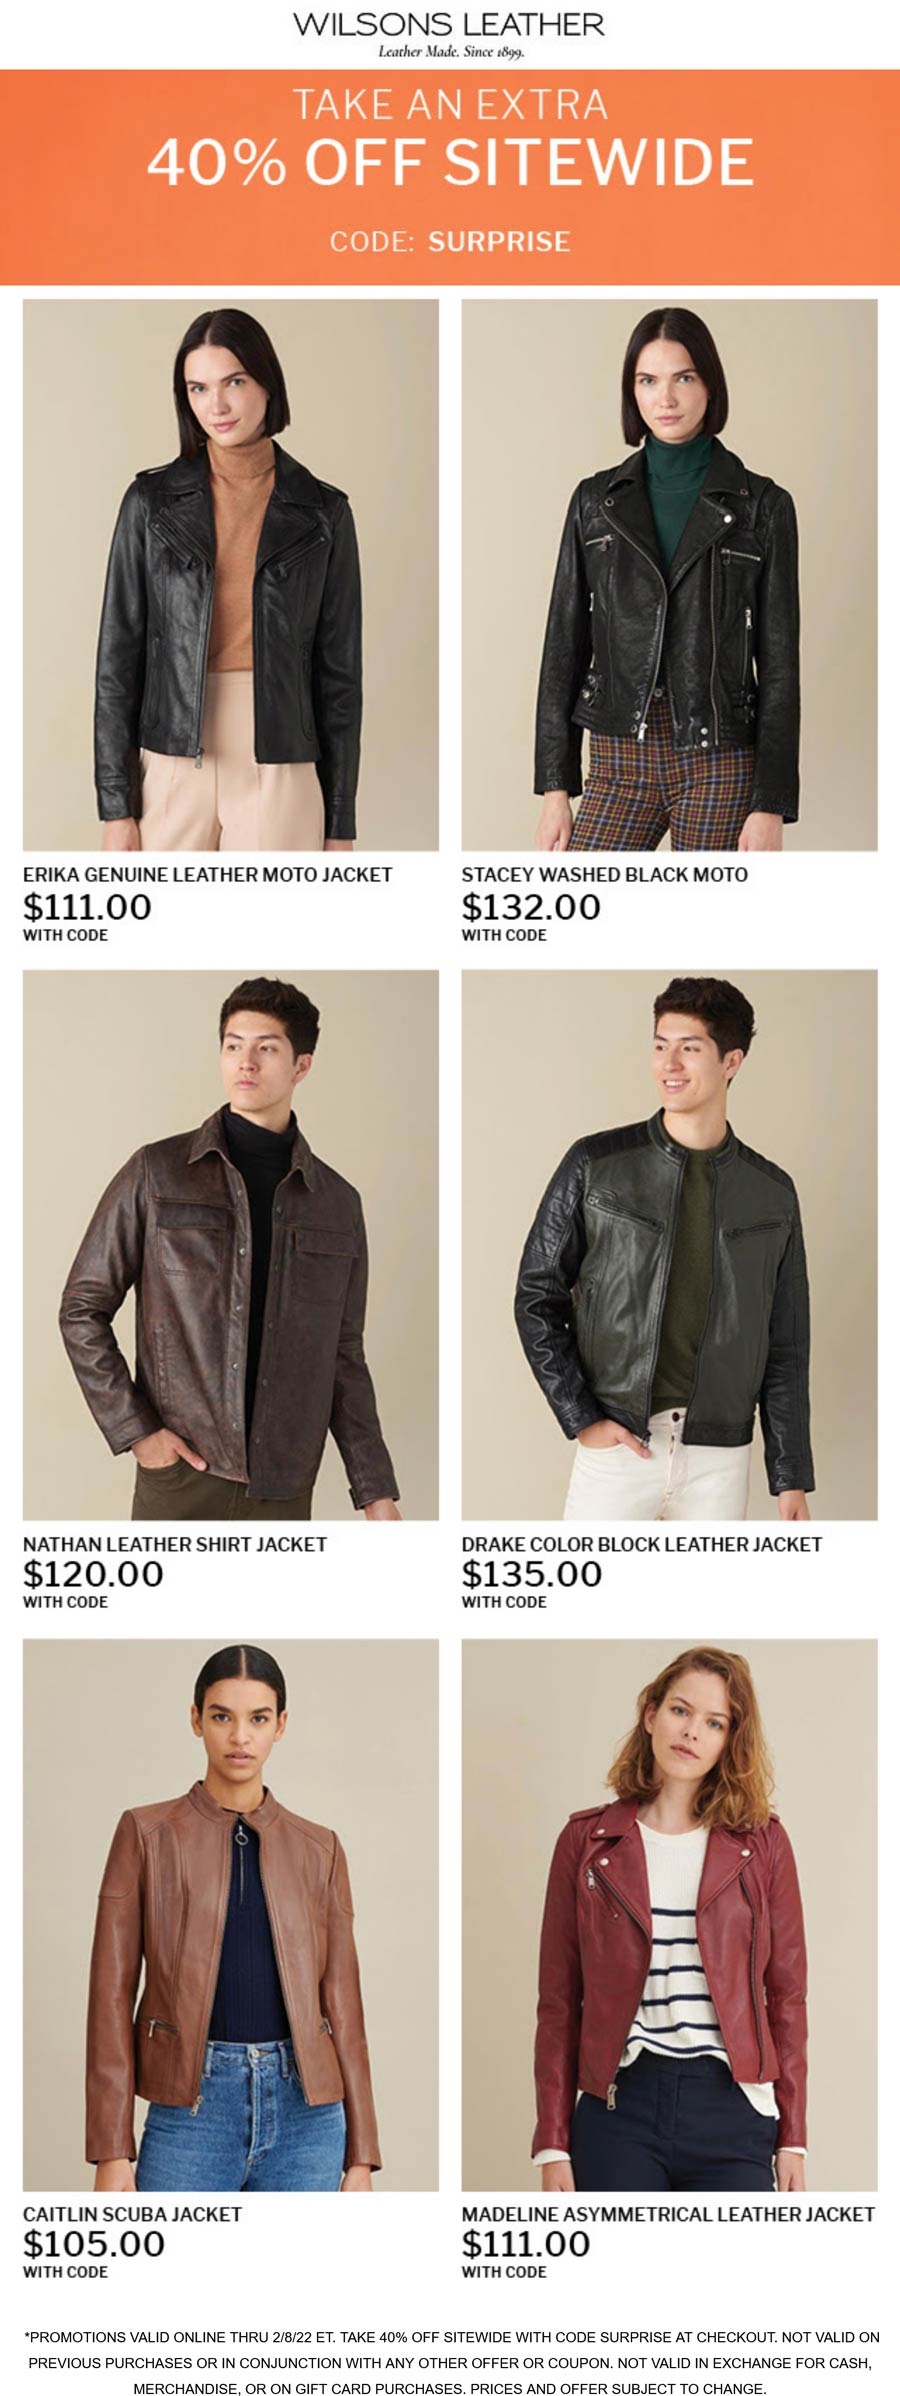 Wilsons Leather stores Coupon  Extra 40% off everything online today at Wilsons Leather via promo code SURPRISE #wilsonsleather 